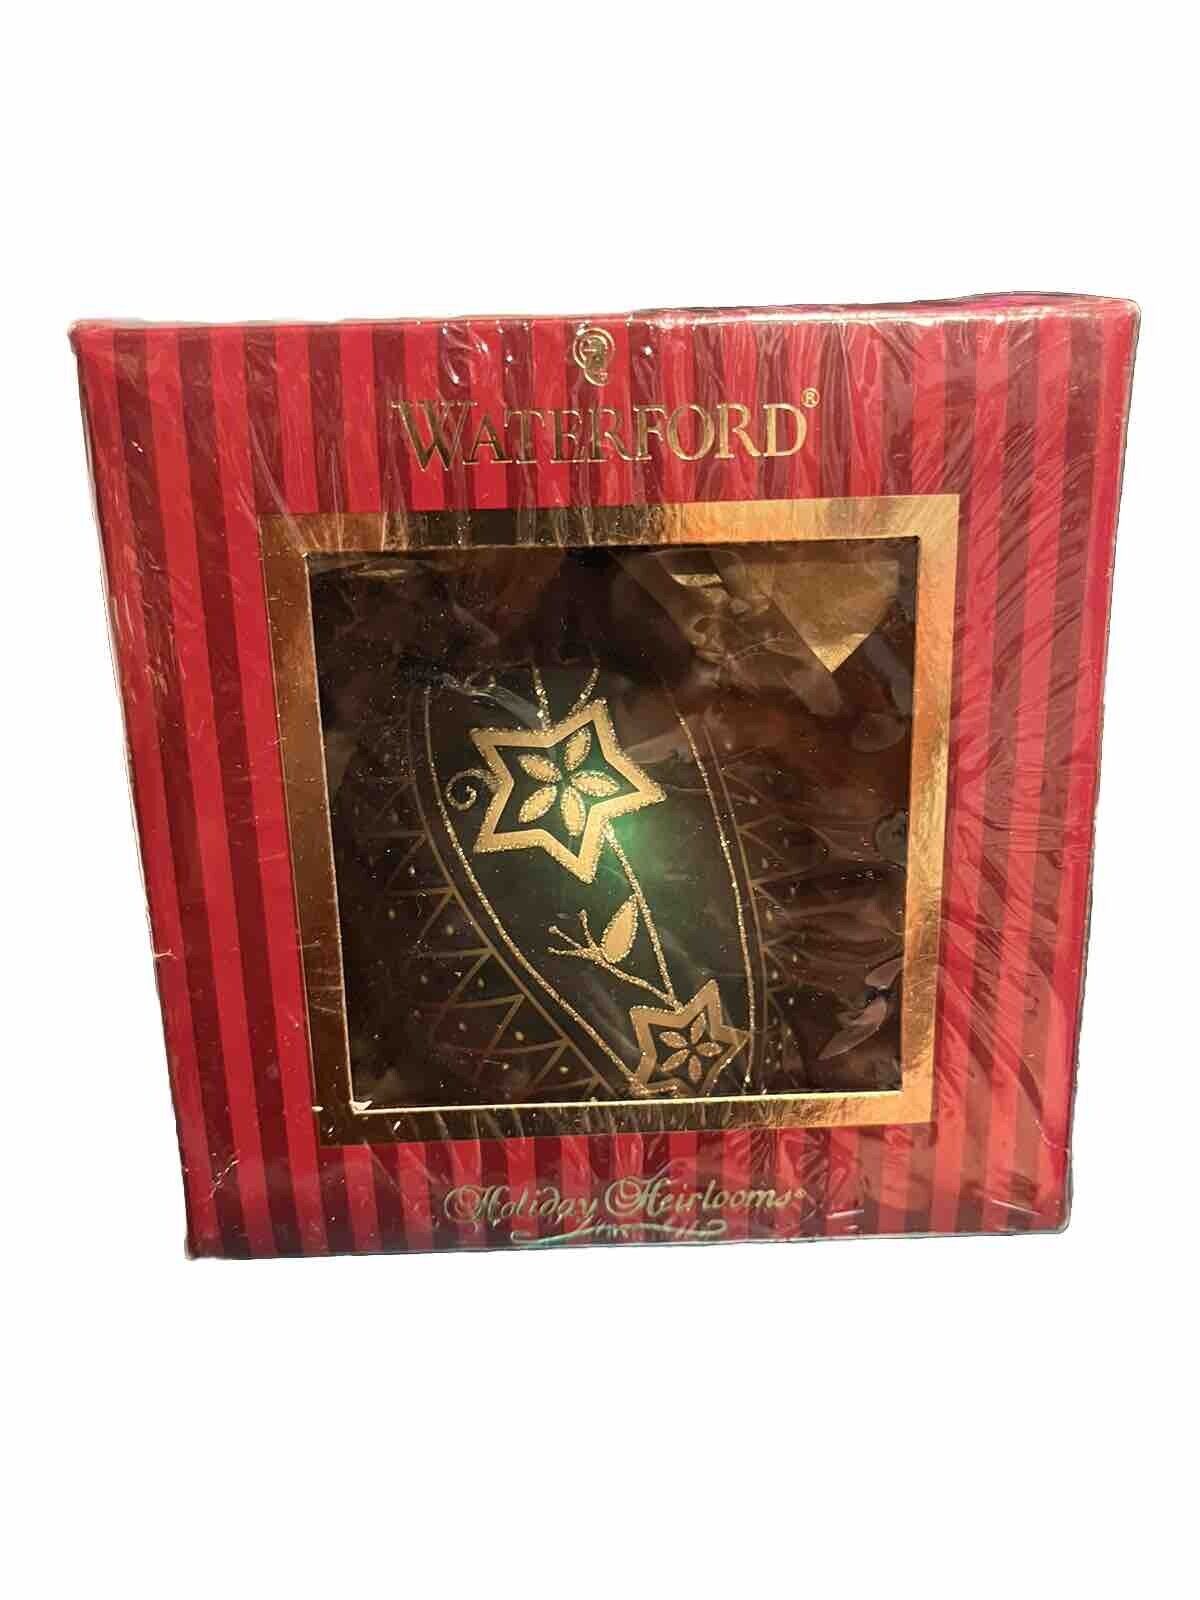 Waterford Holiday Heirloom's Fanciful Green Egg Jeweled Ornament Christmas New